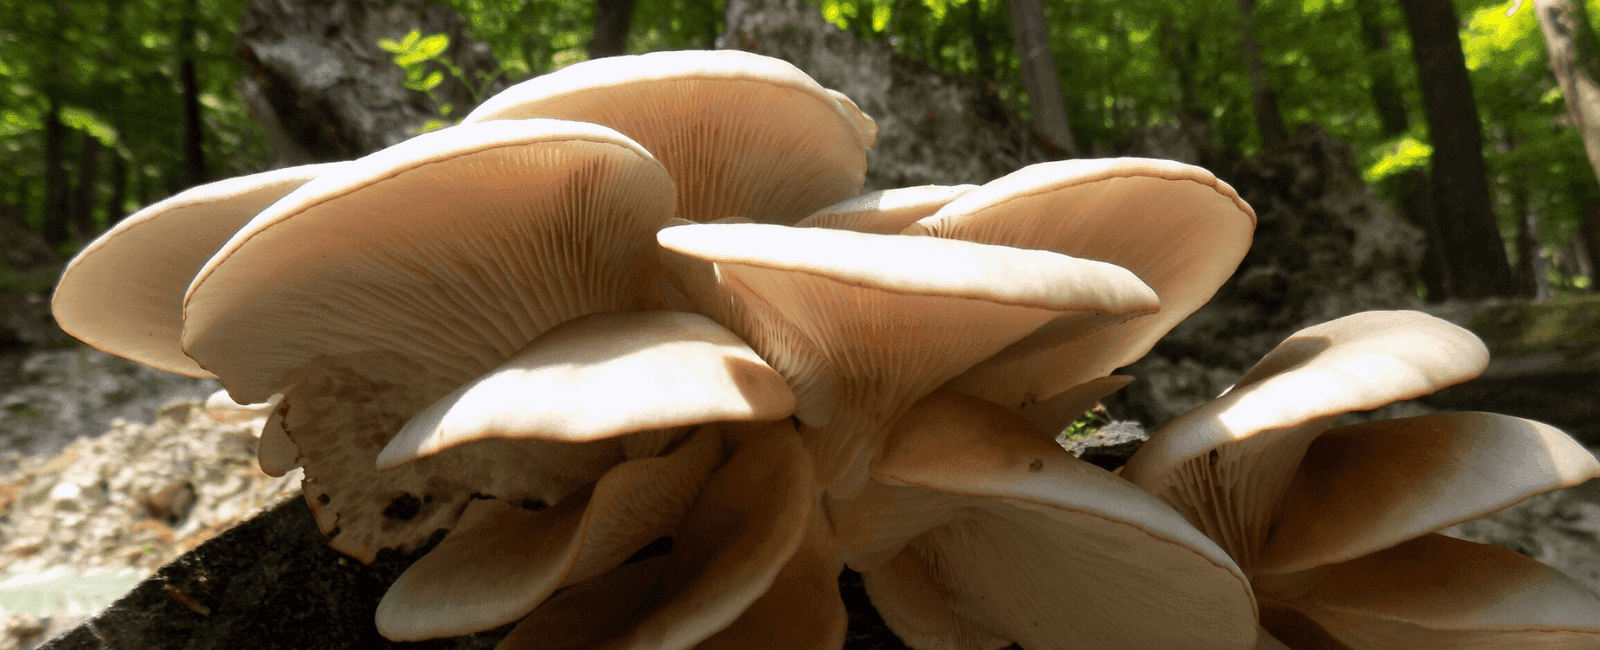 Experts Caution Against Growing Non-Native Fungi at Home Due to Ecological Risks